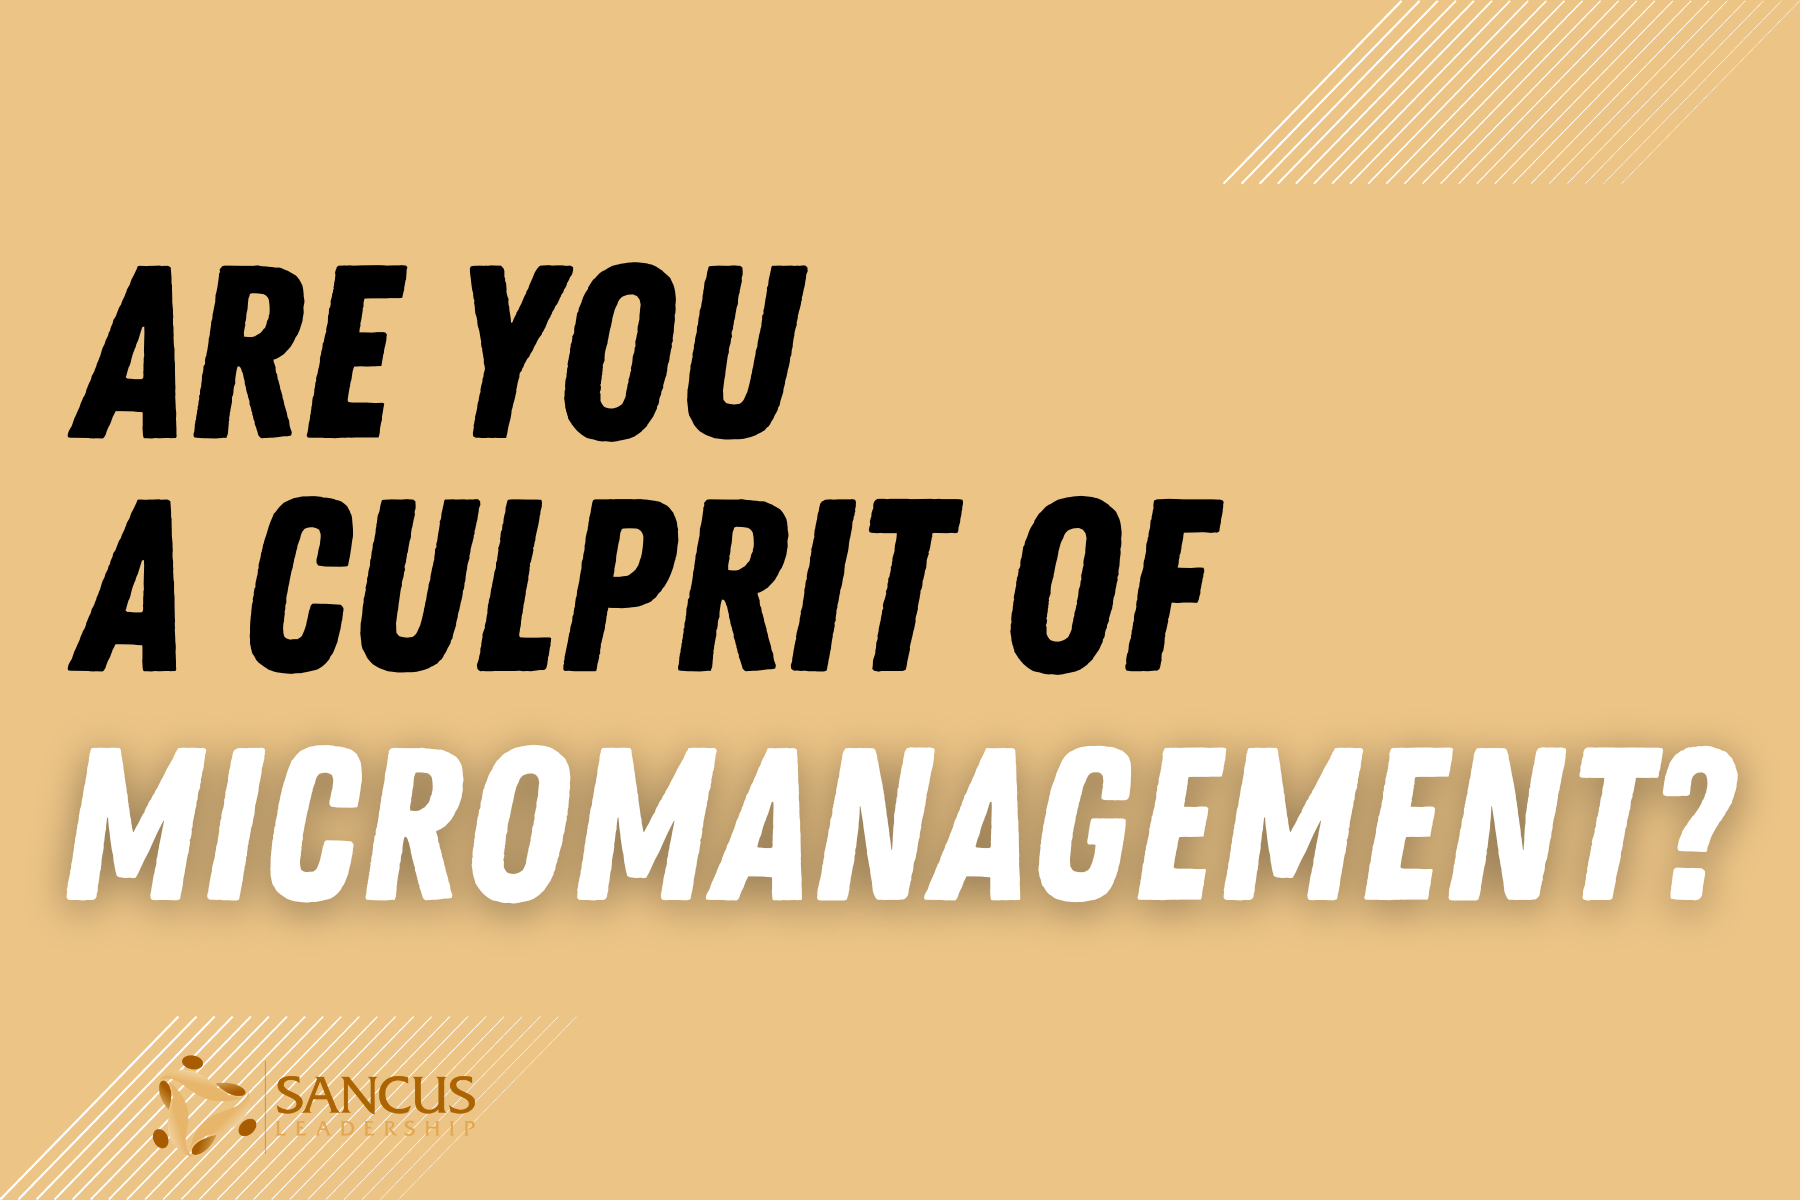 Are you mircomanaging your team?